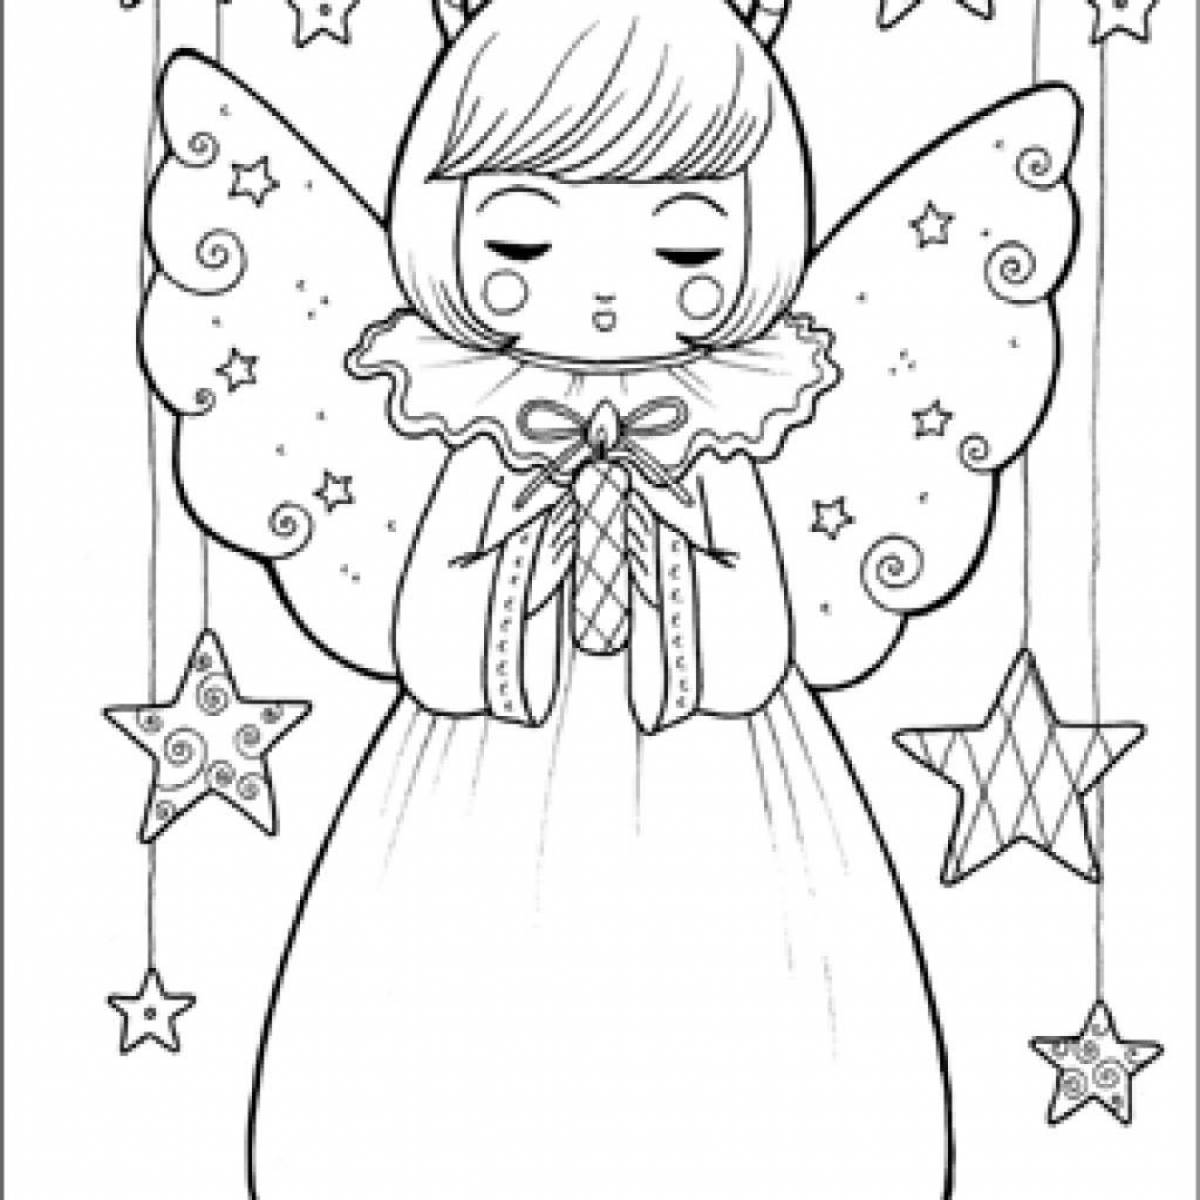 Jazzy Christmas card coloring page